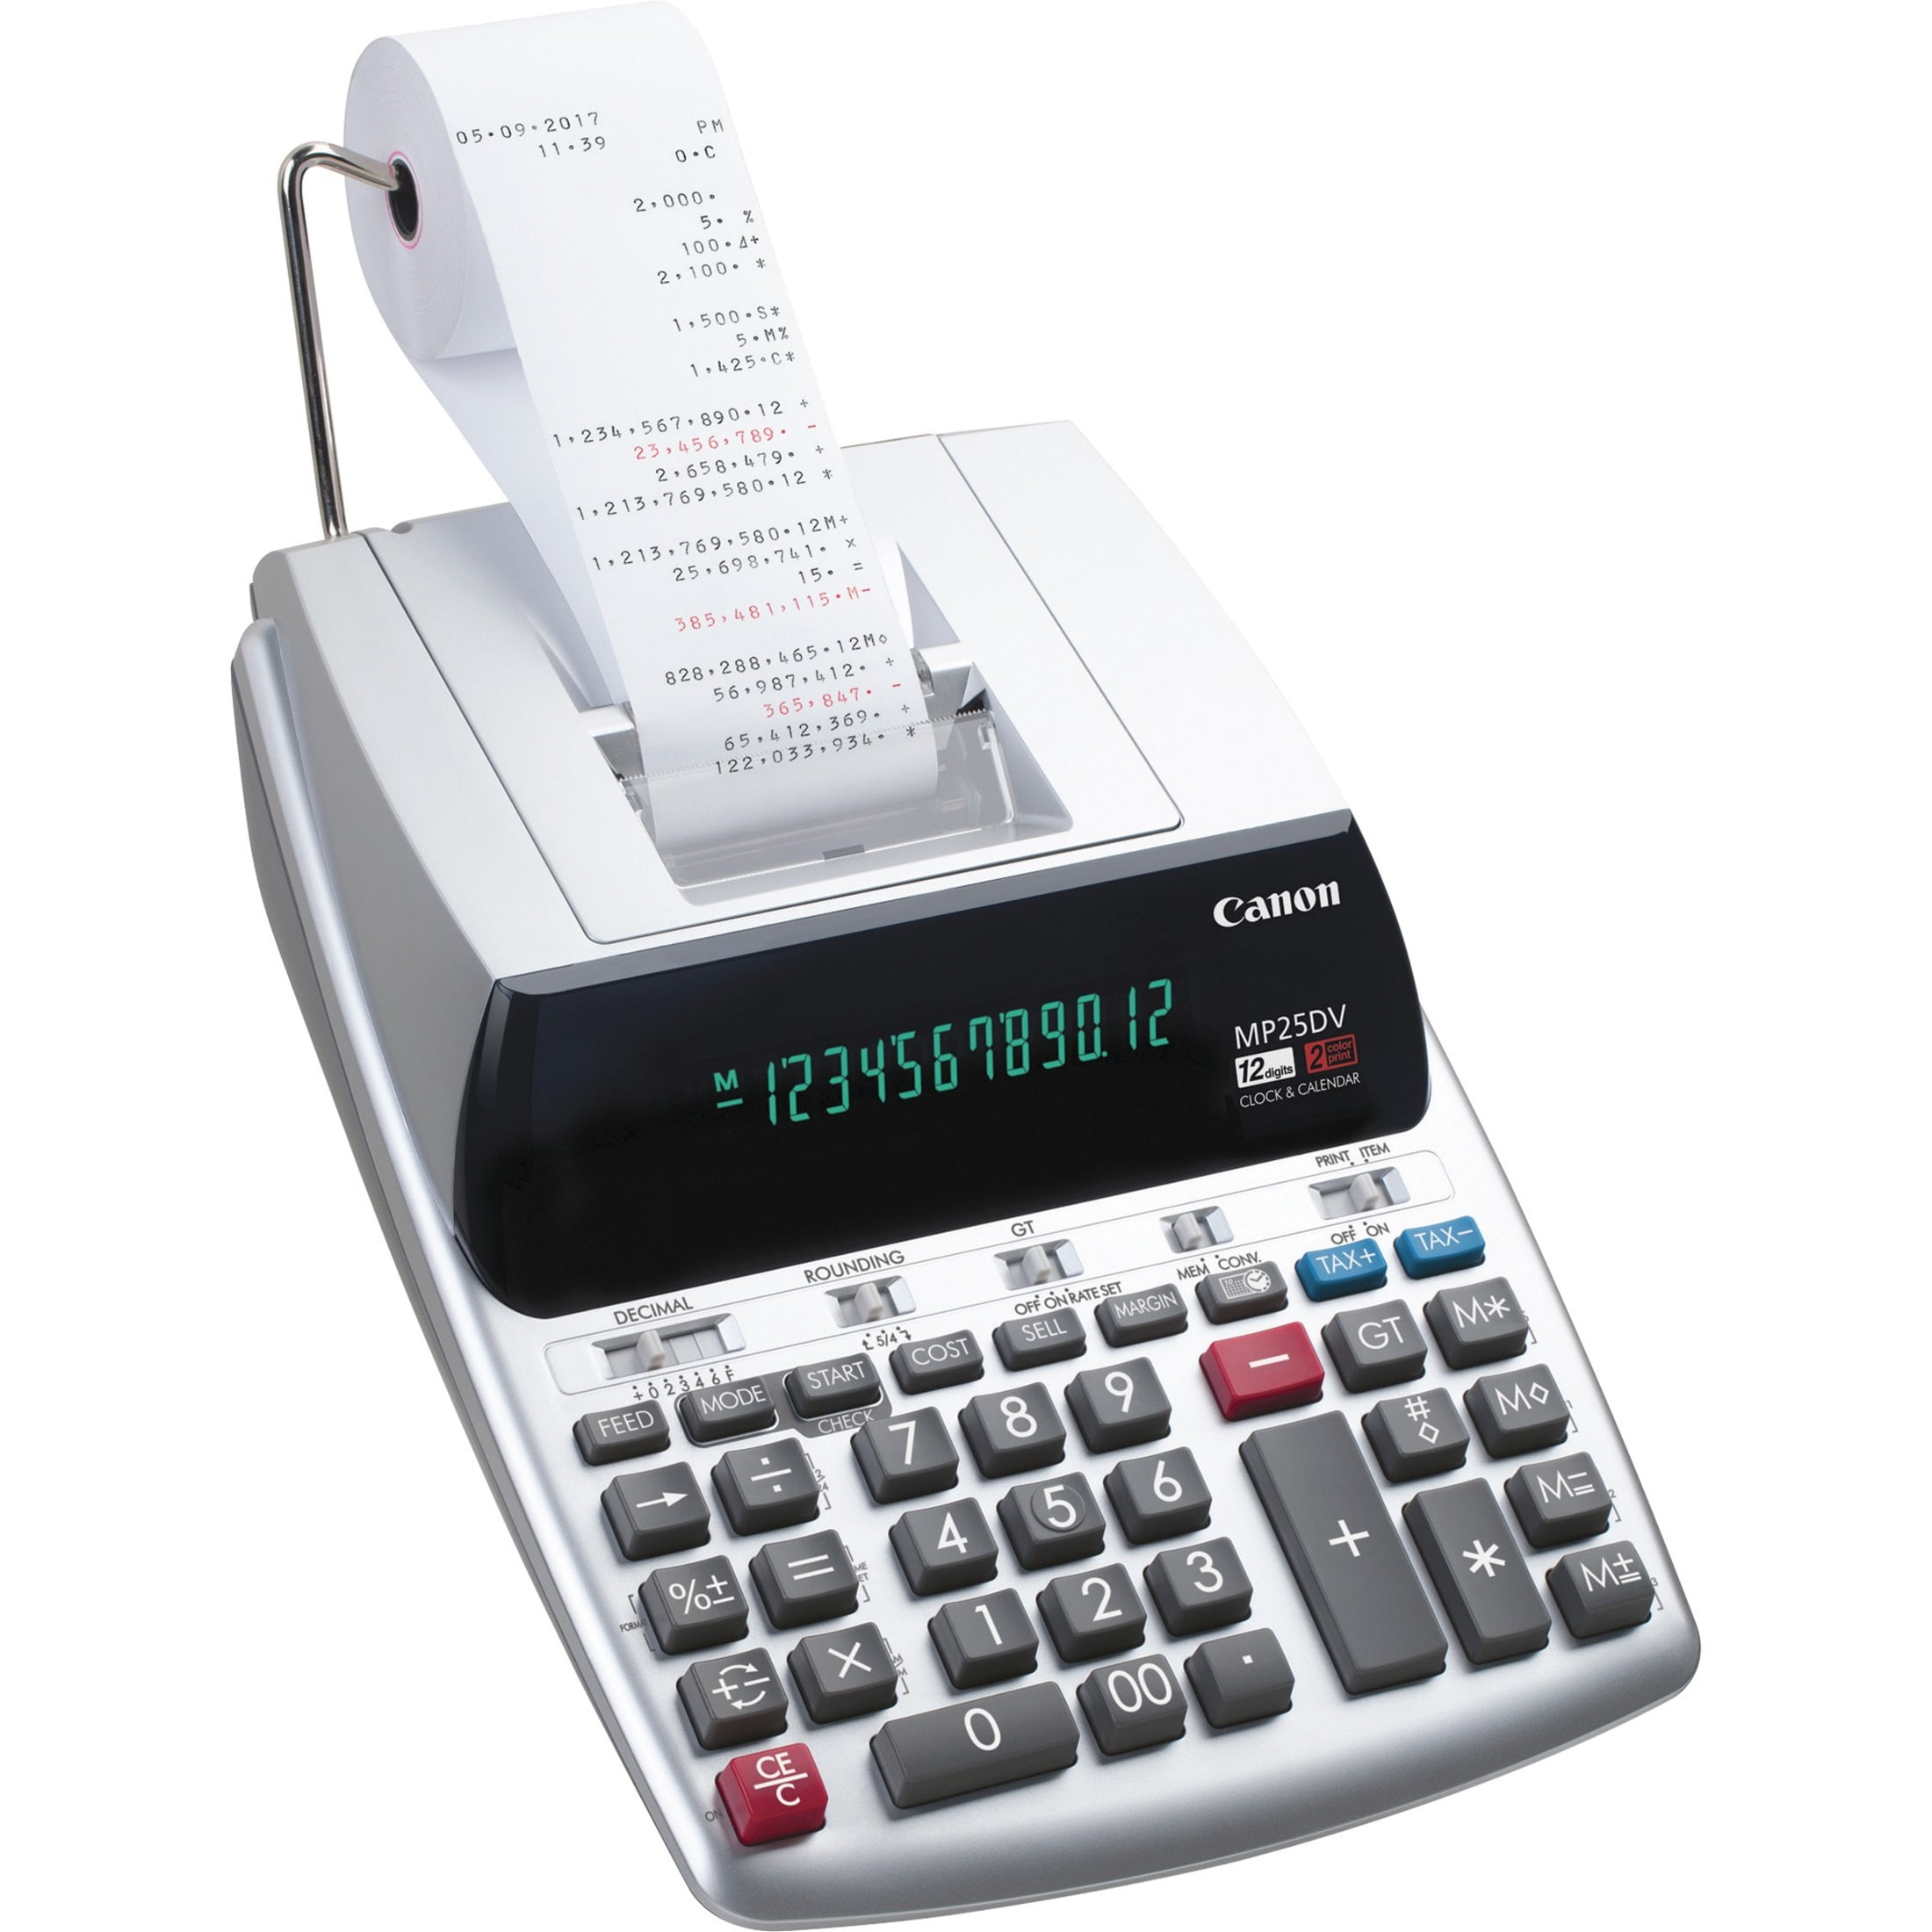 CNMMP21DX MP21DX Two-Color Printing Calculator 